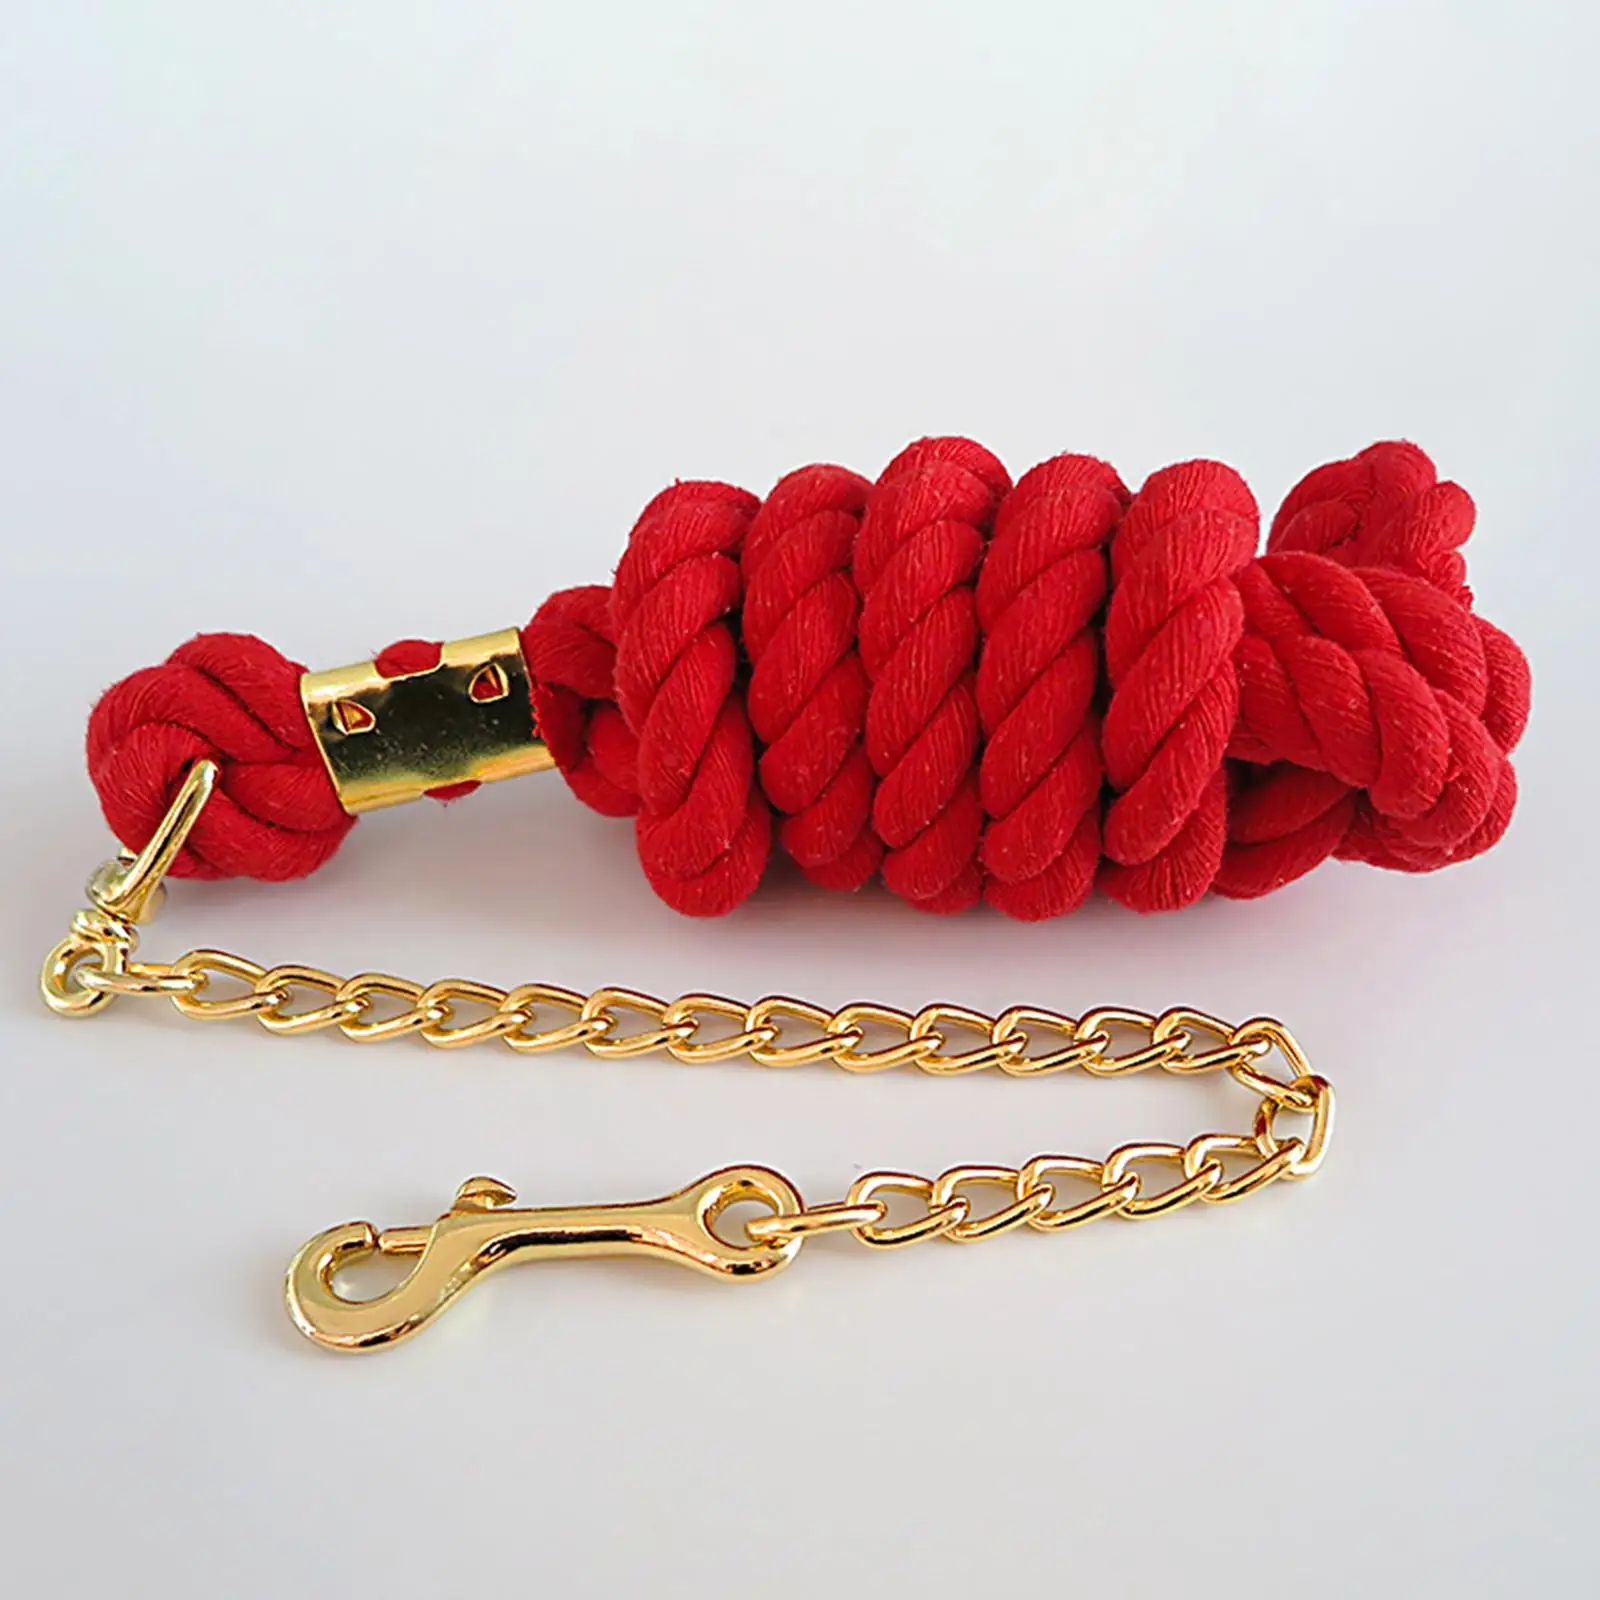 Braided   Leading Rope with Chain Accessories Easy Use Practical